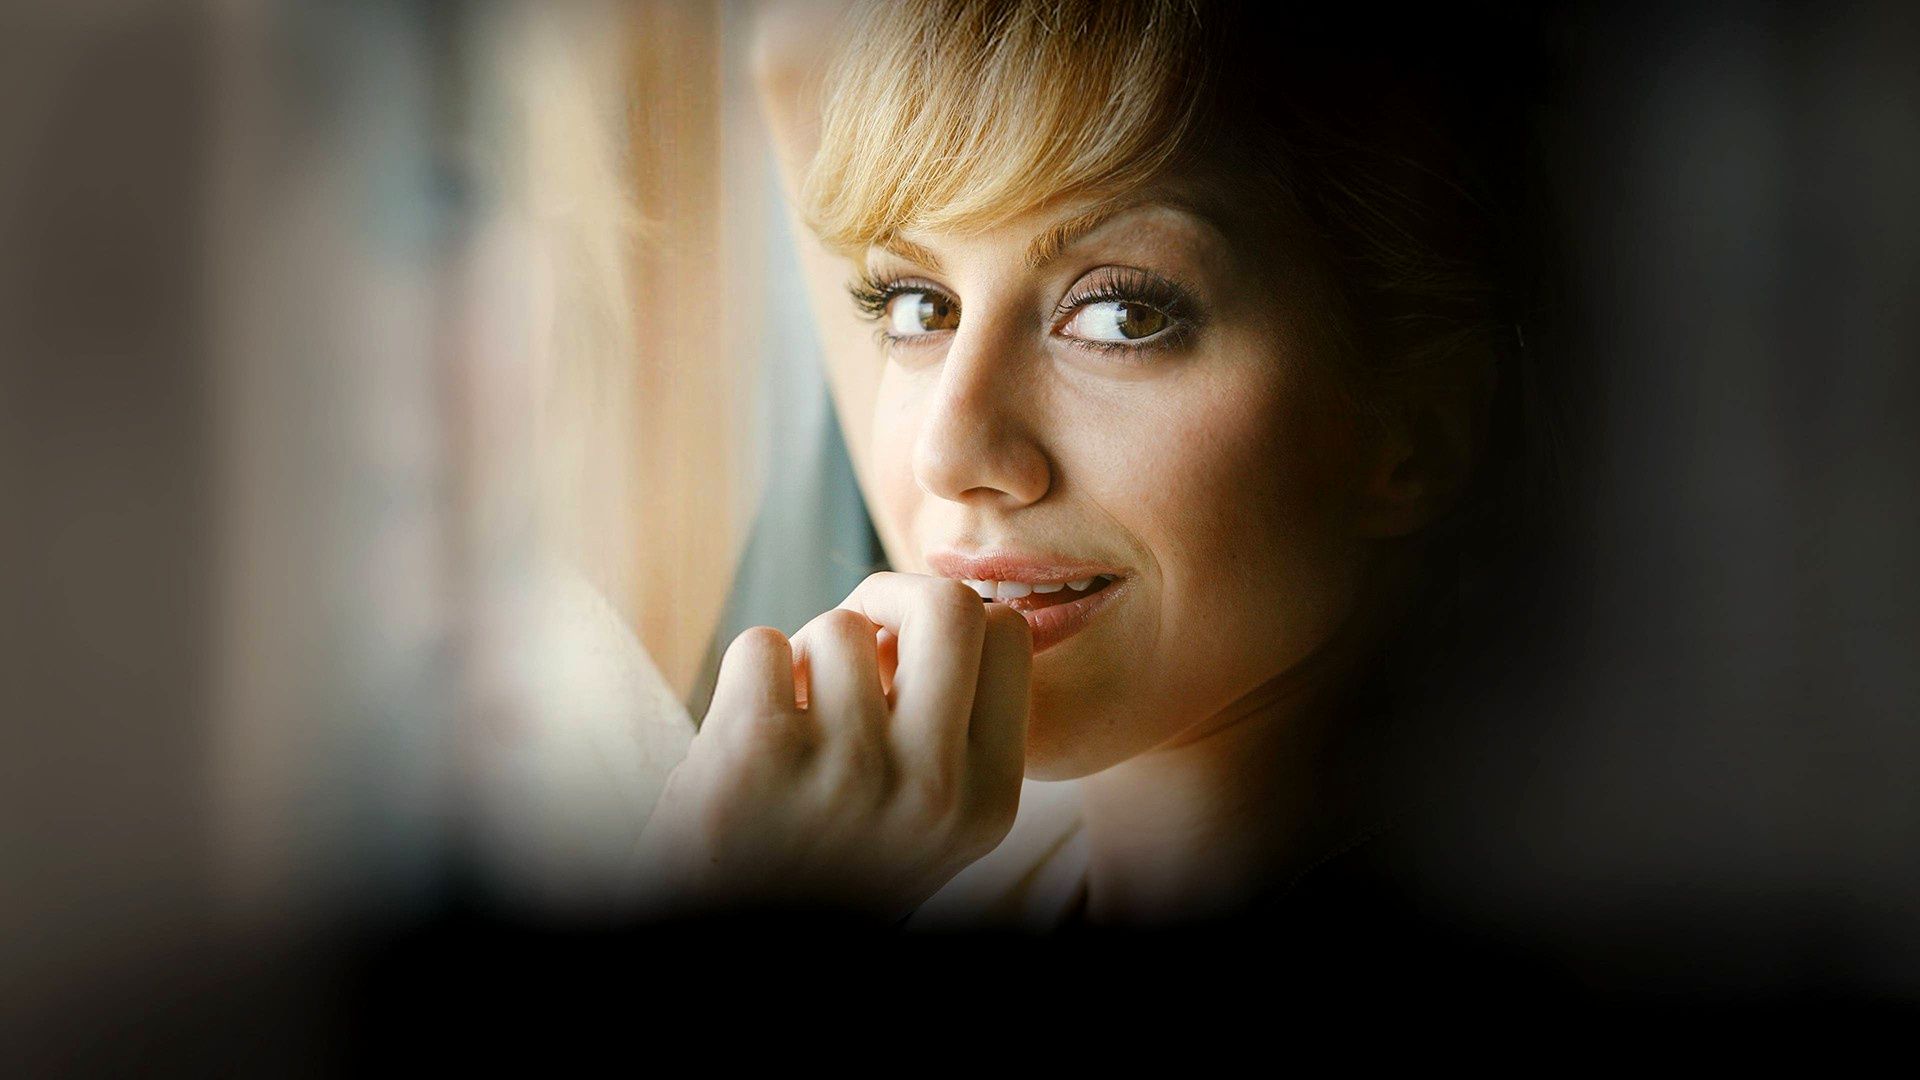 What Happened, Brittany Murphy? background